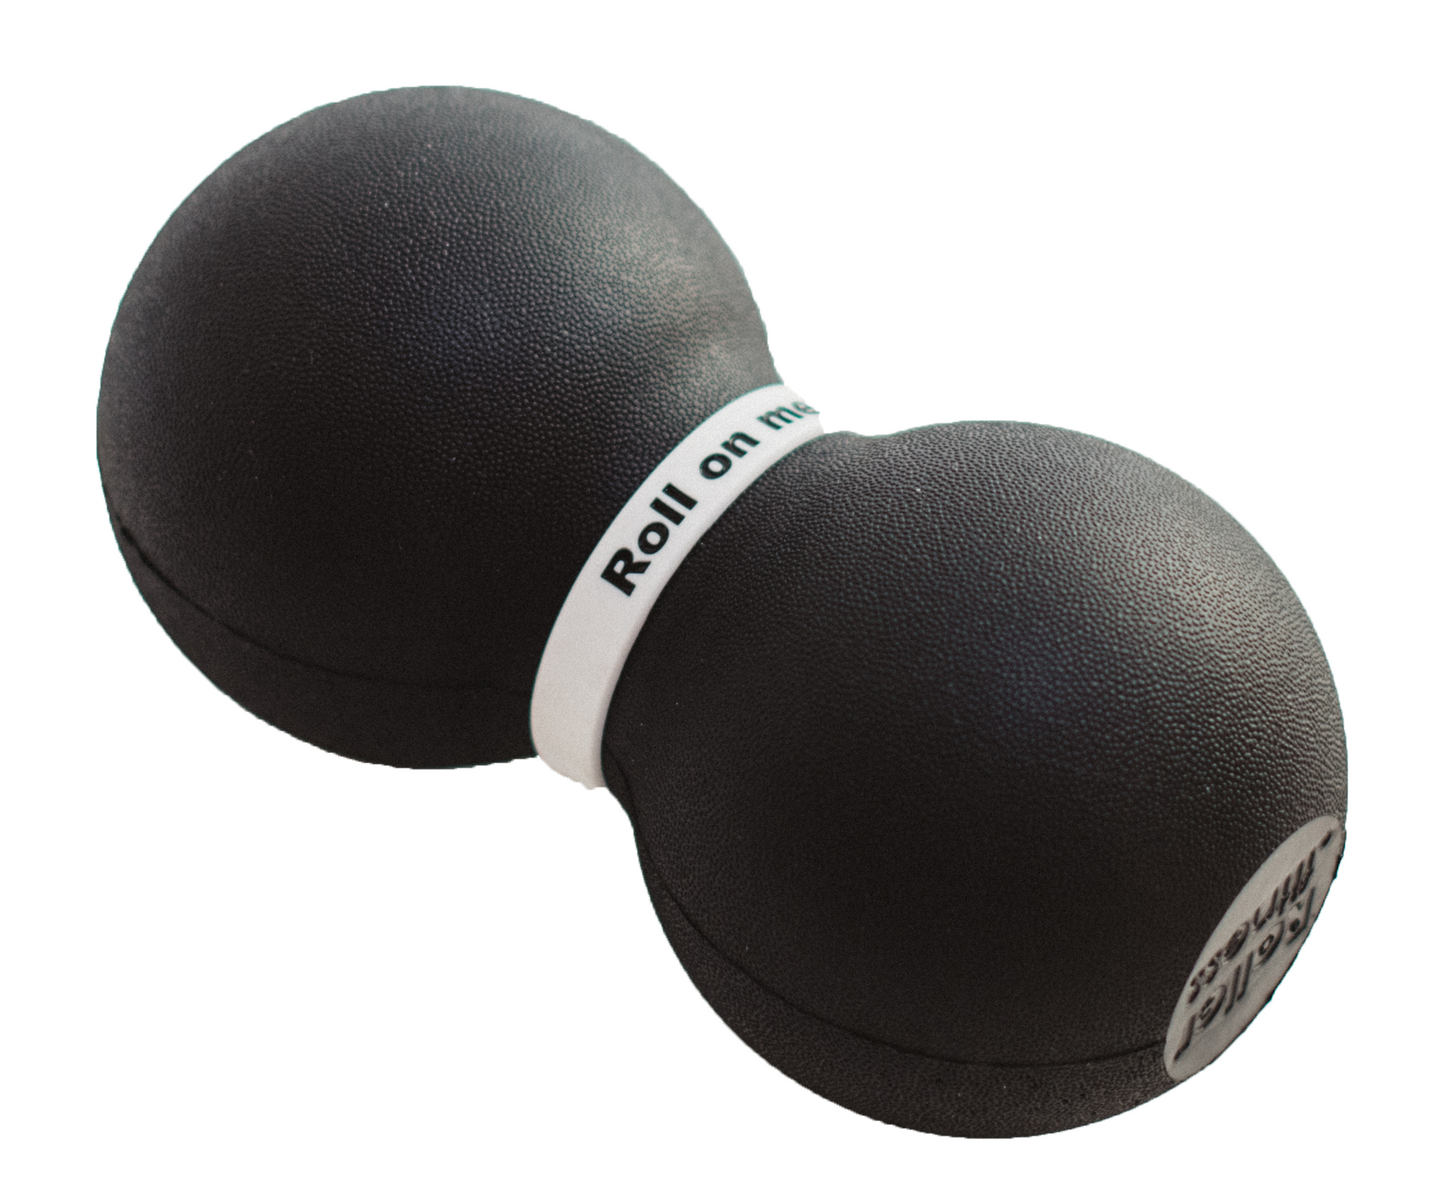 Infinity Roller, Our Compact Foam Roller & Exercise Roller